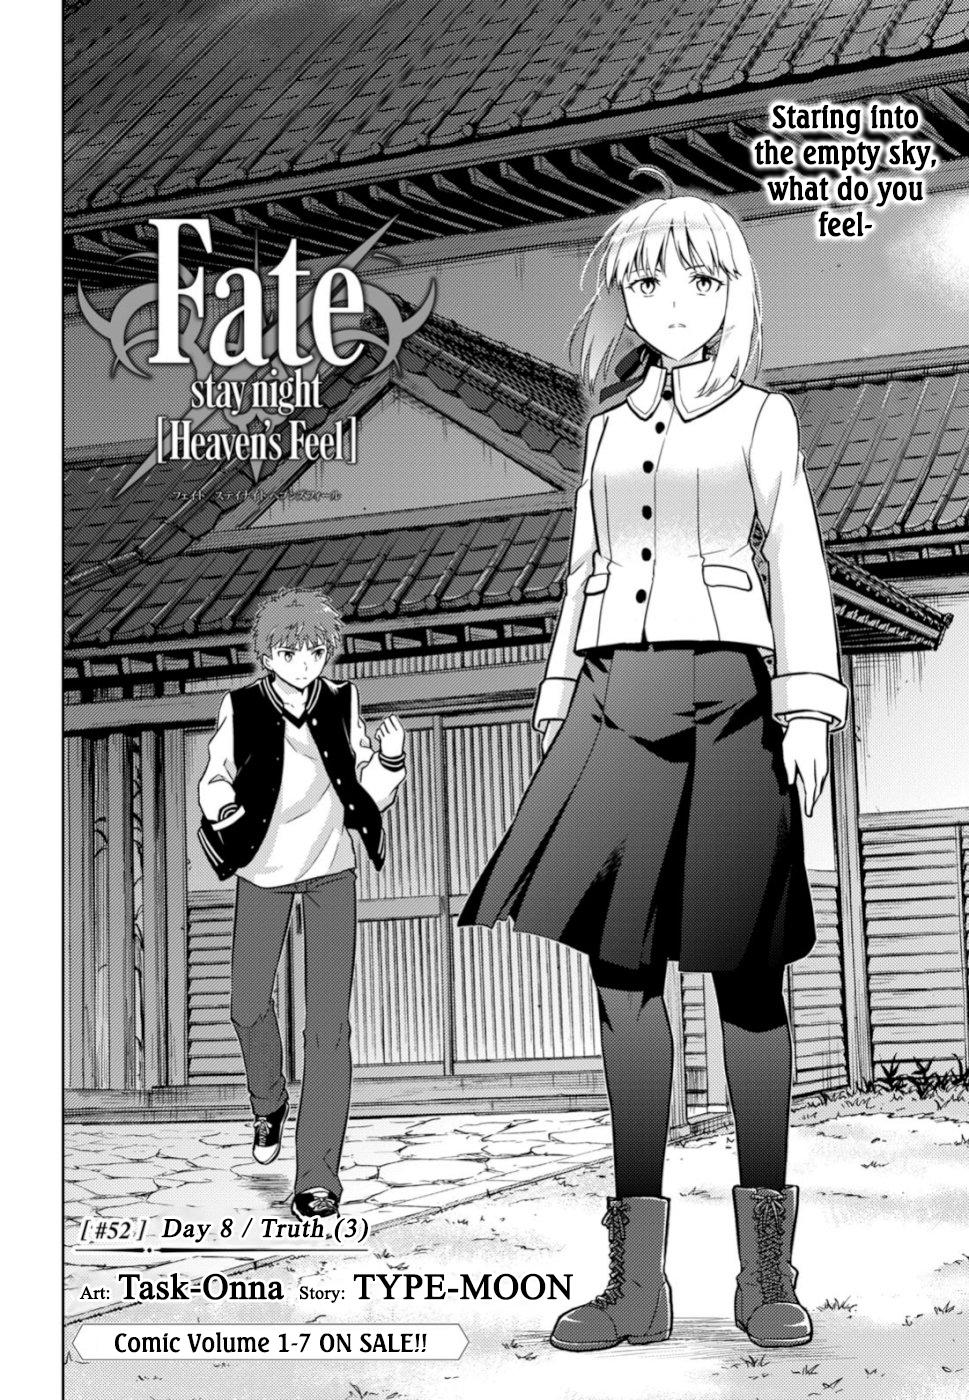 Fate/stay night Volume 8 by Type-Moon